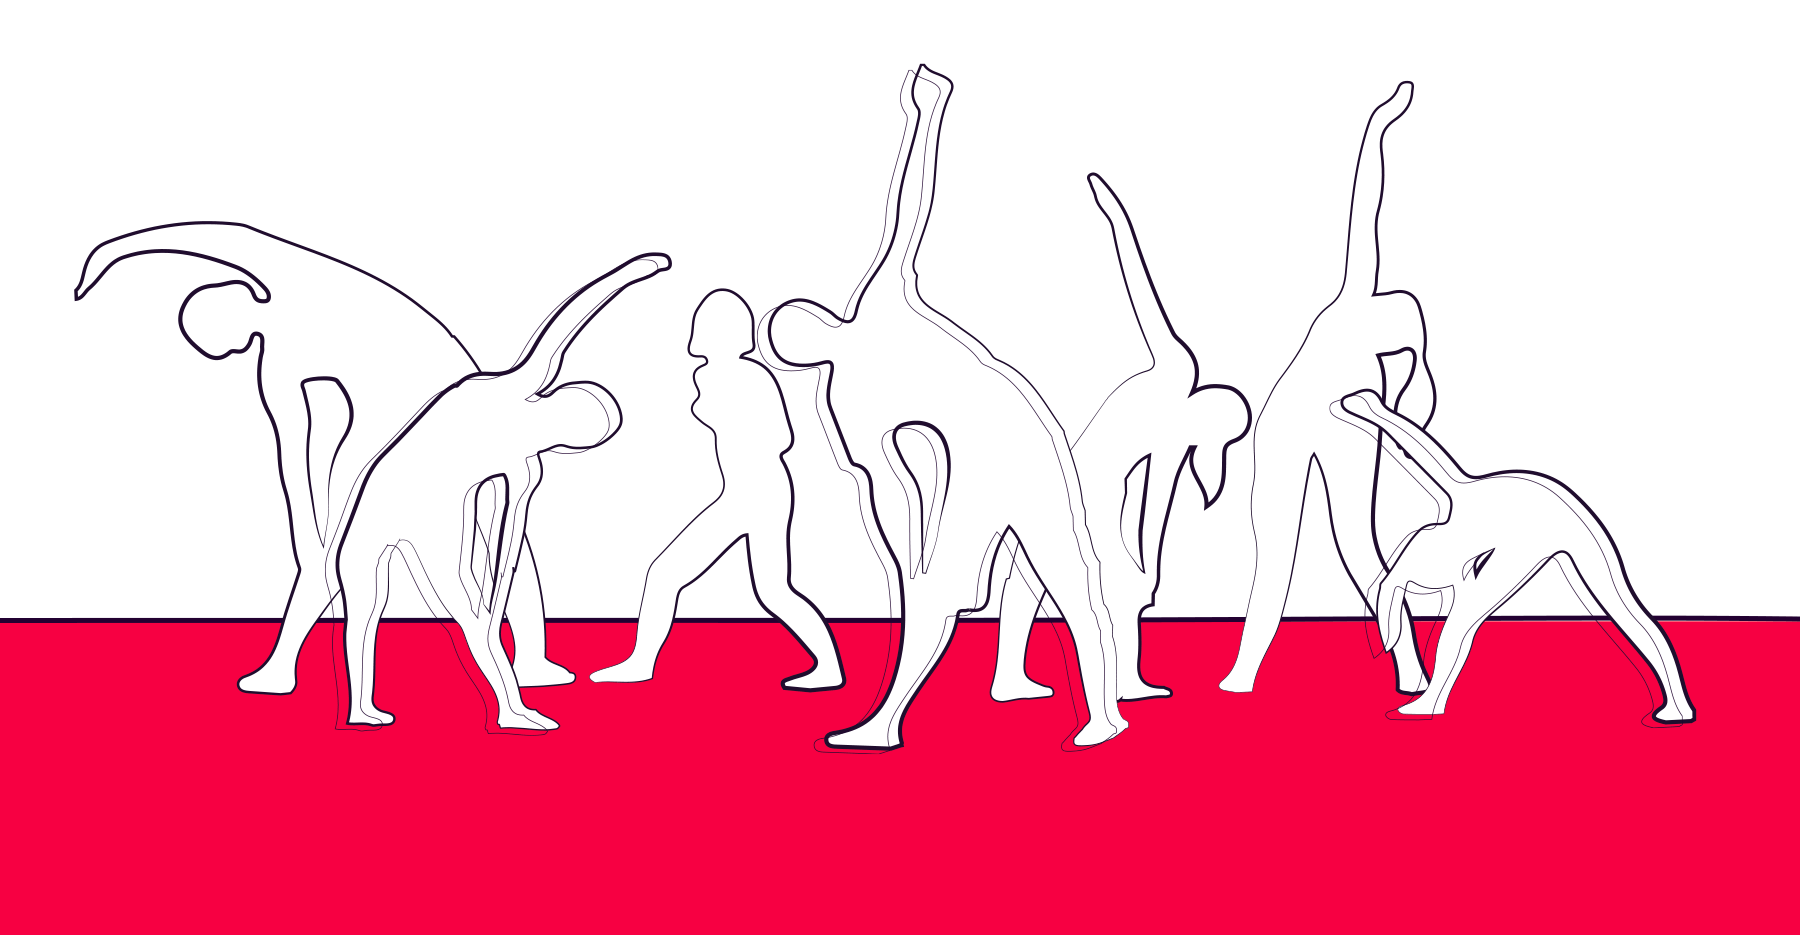 An illustration of silhouettes of people stretching